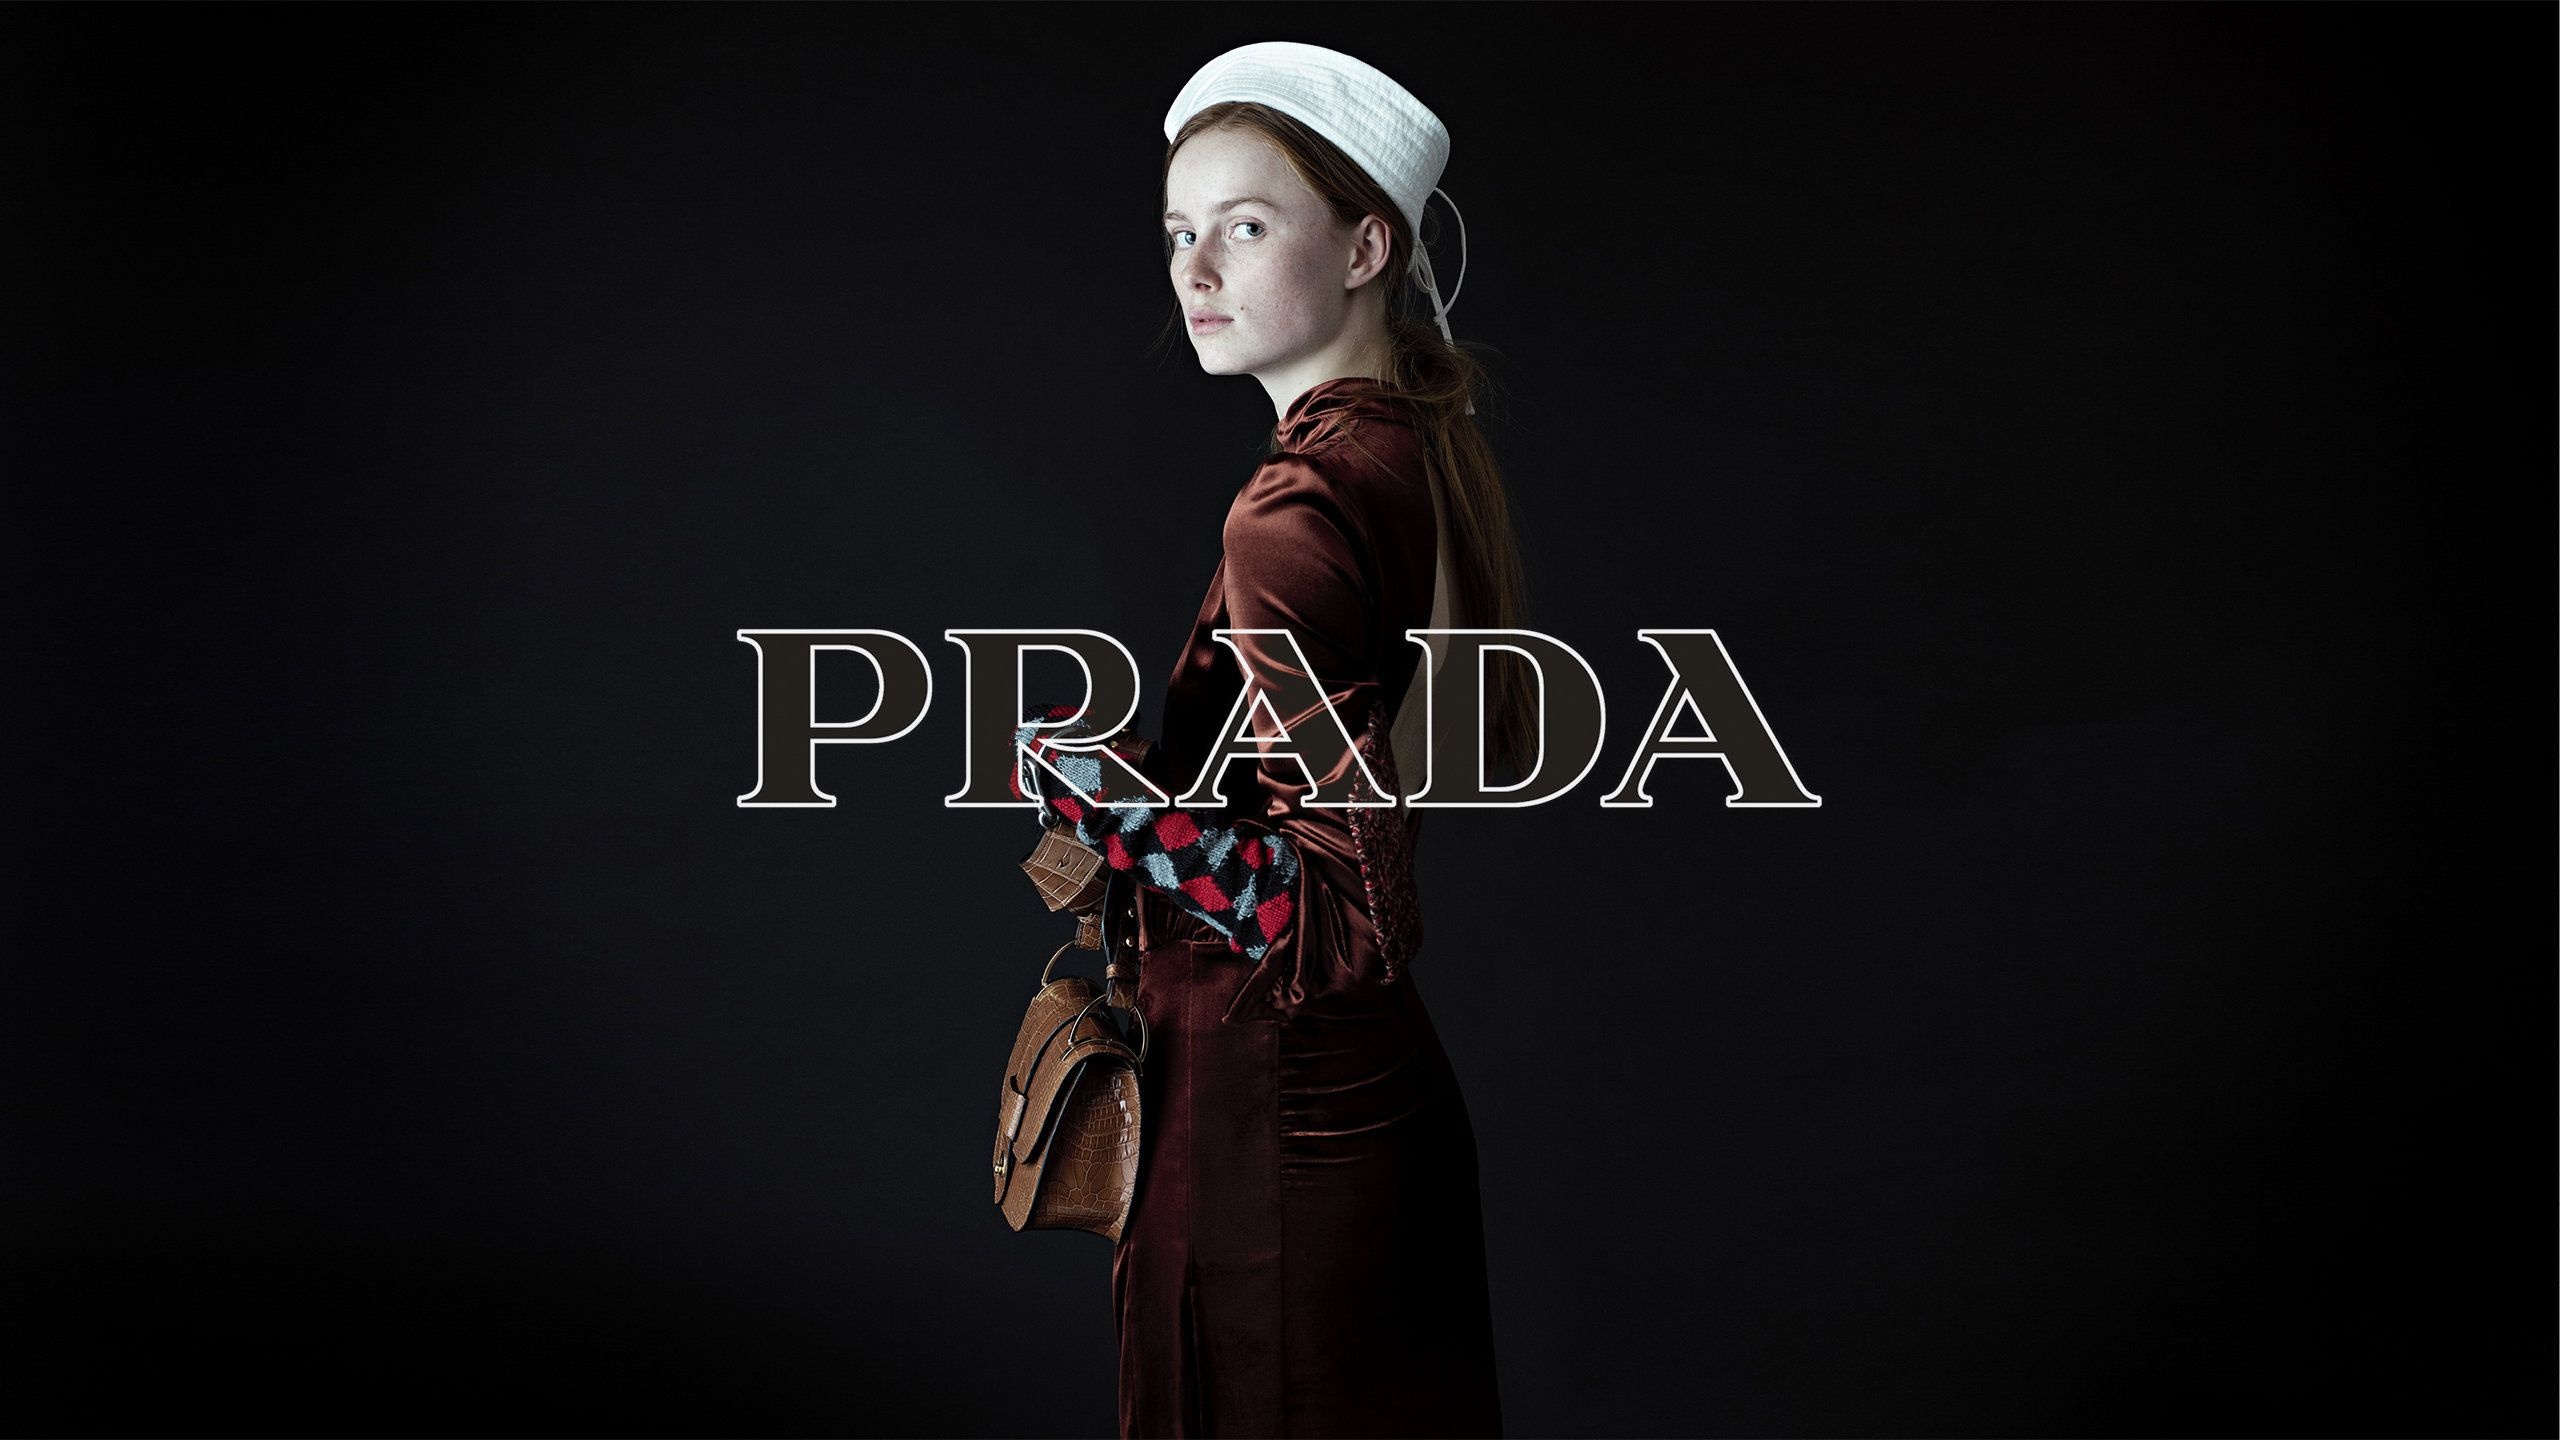 Prada: Iconic brand, Innovative but maintaining the classically refined style. 2560x1440 HD Wallpaper.